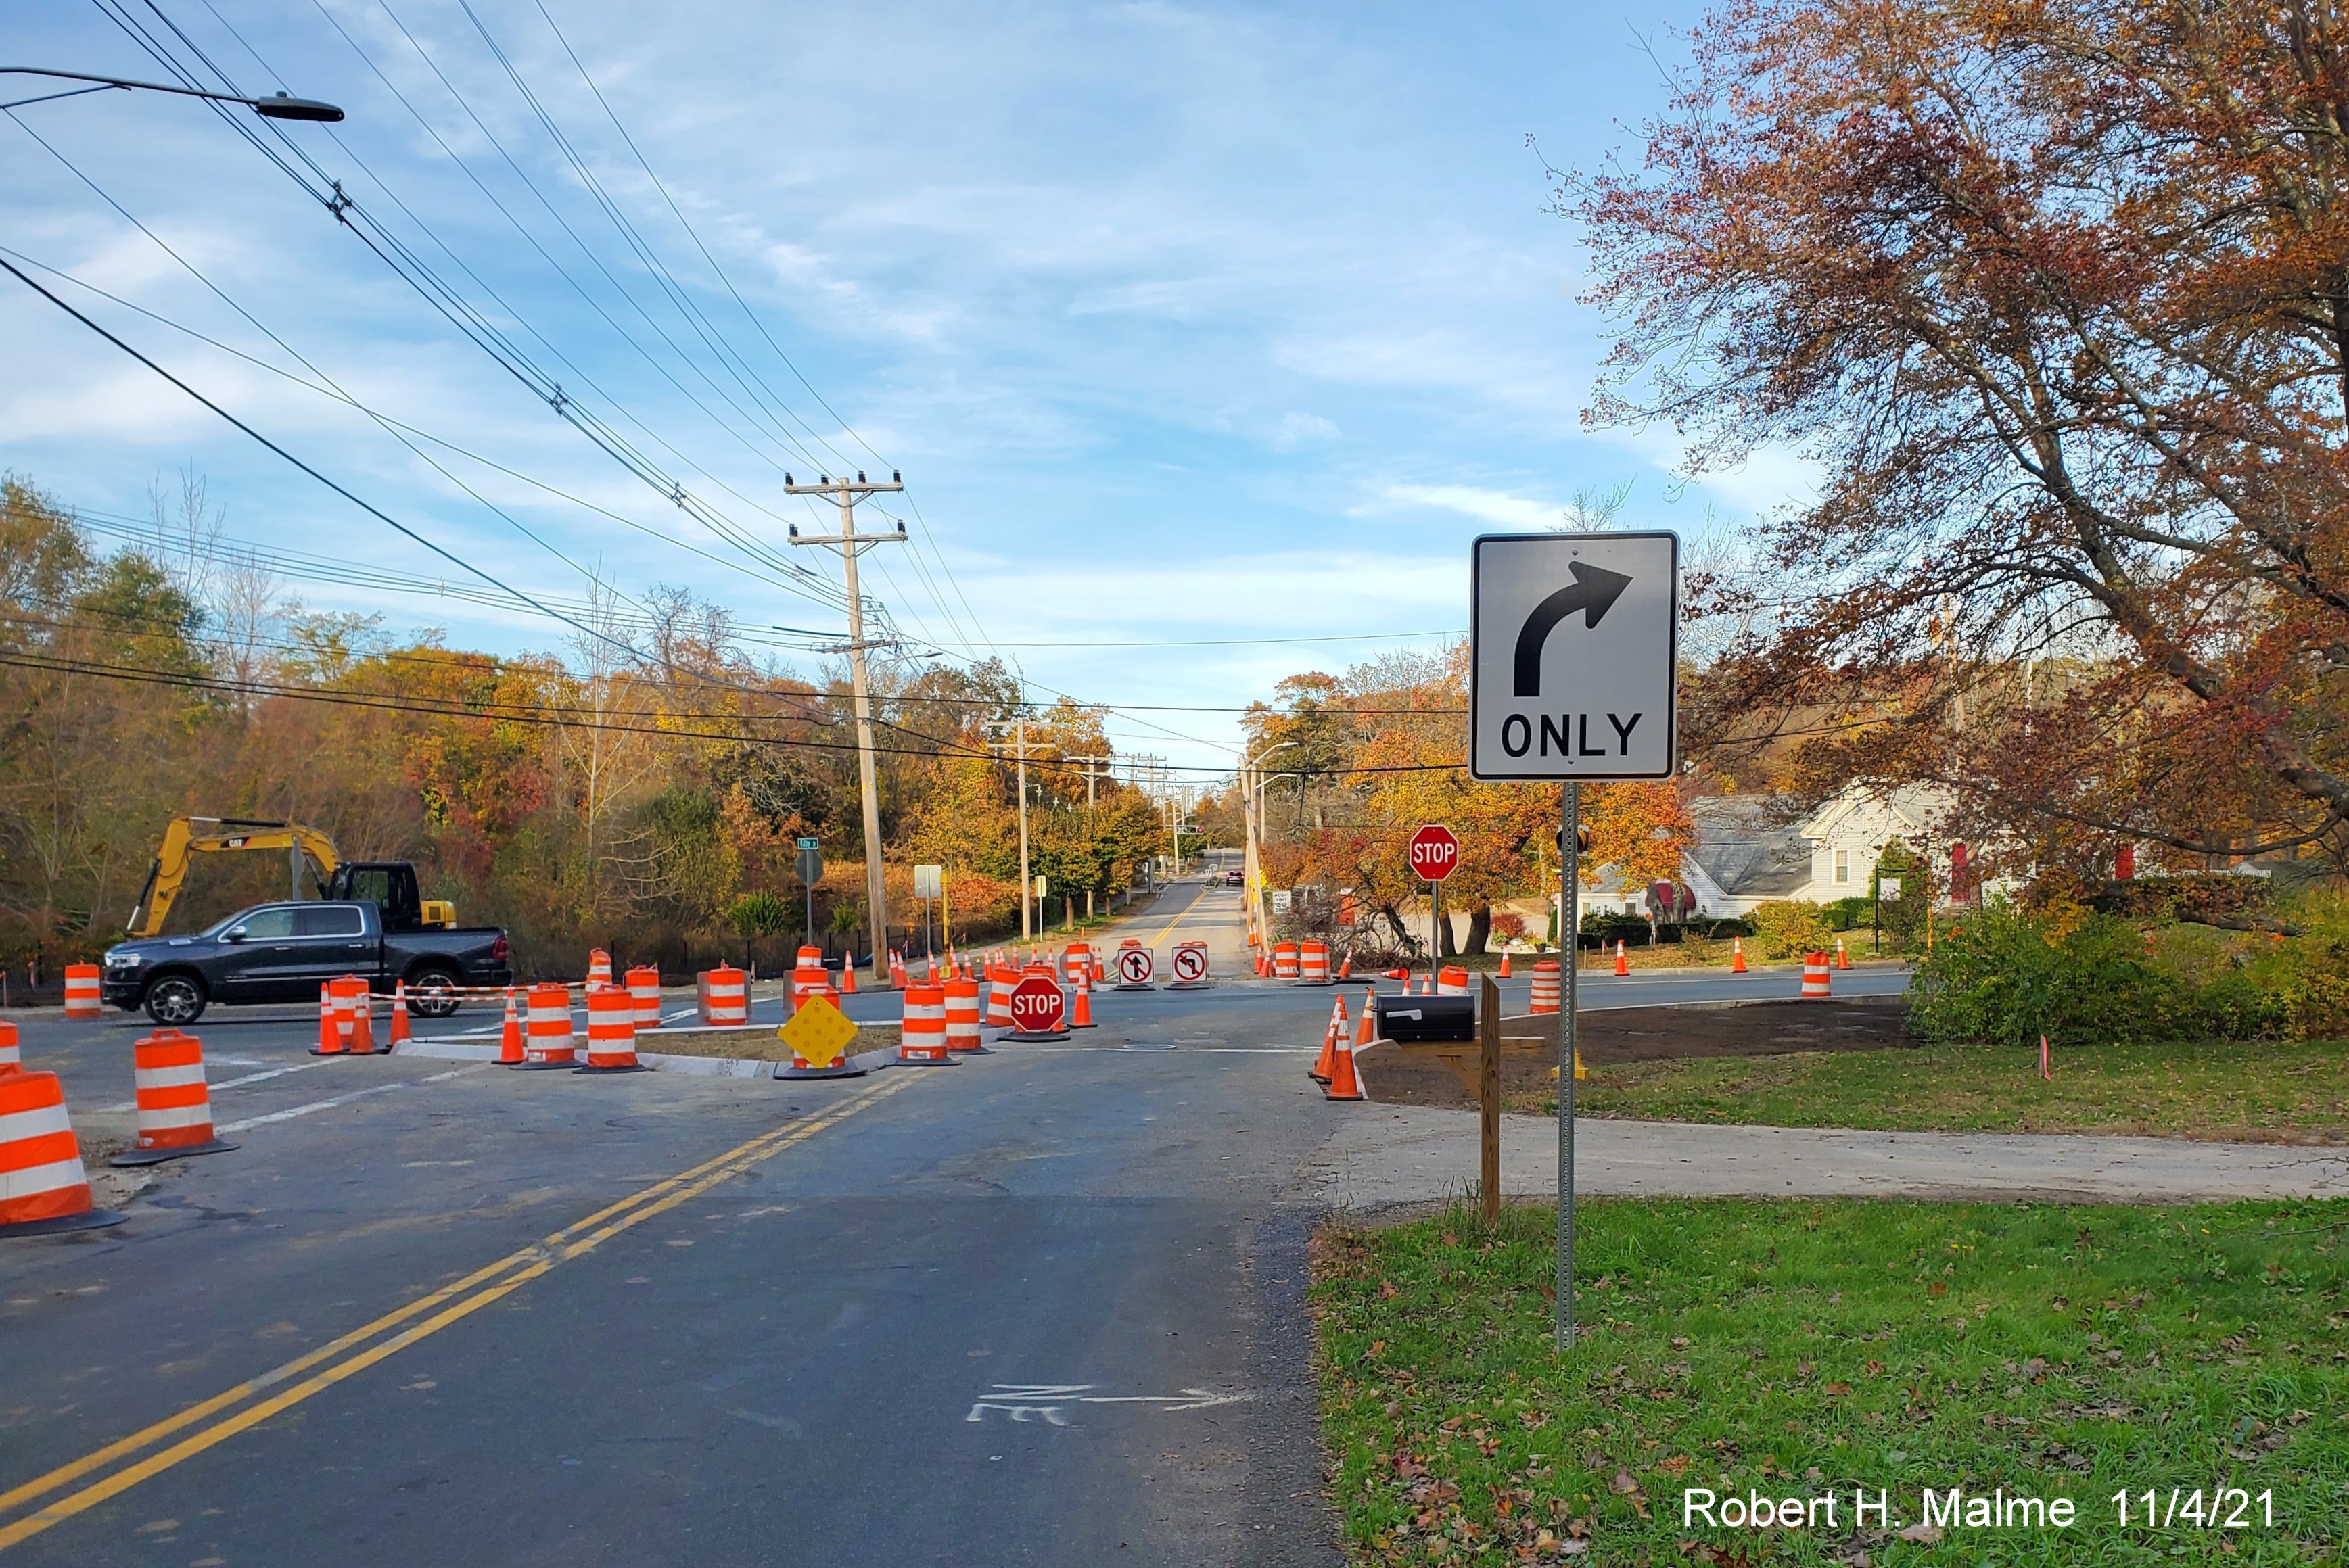 Newly installed Right Turn Only sign headed east on Kilby Street at MA 3A intersection in Hingham, November 2021